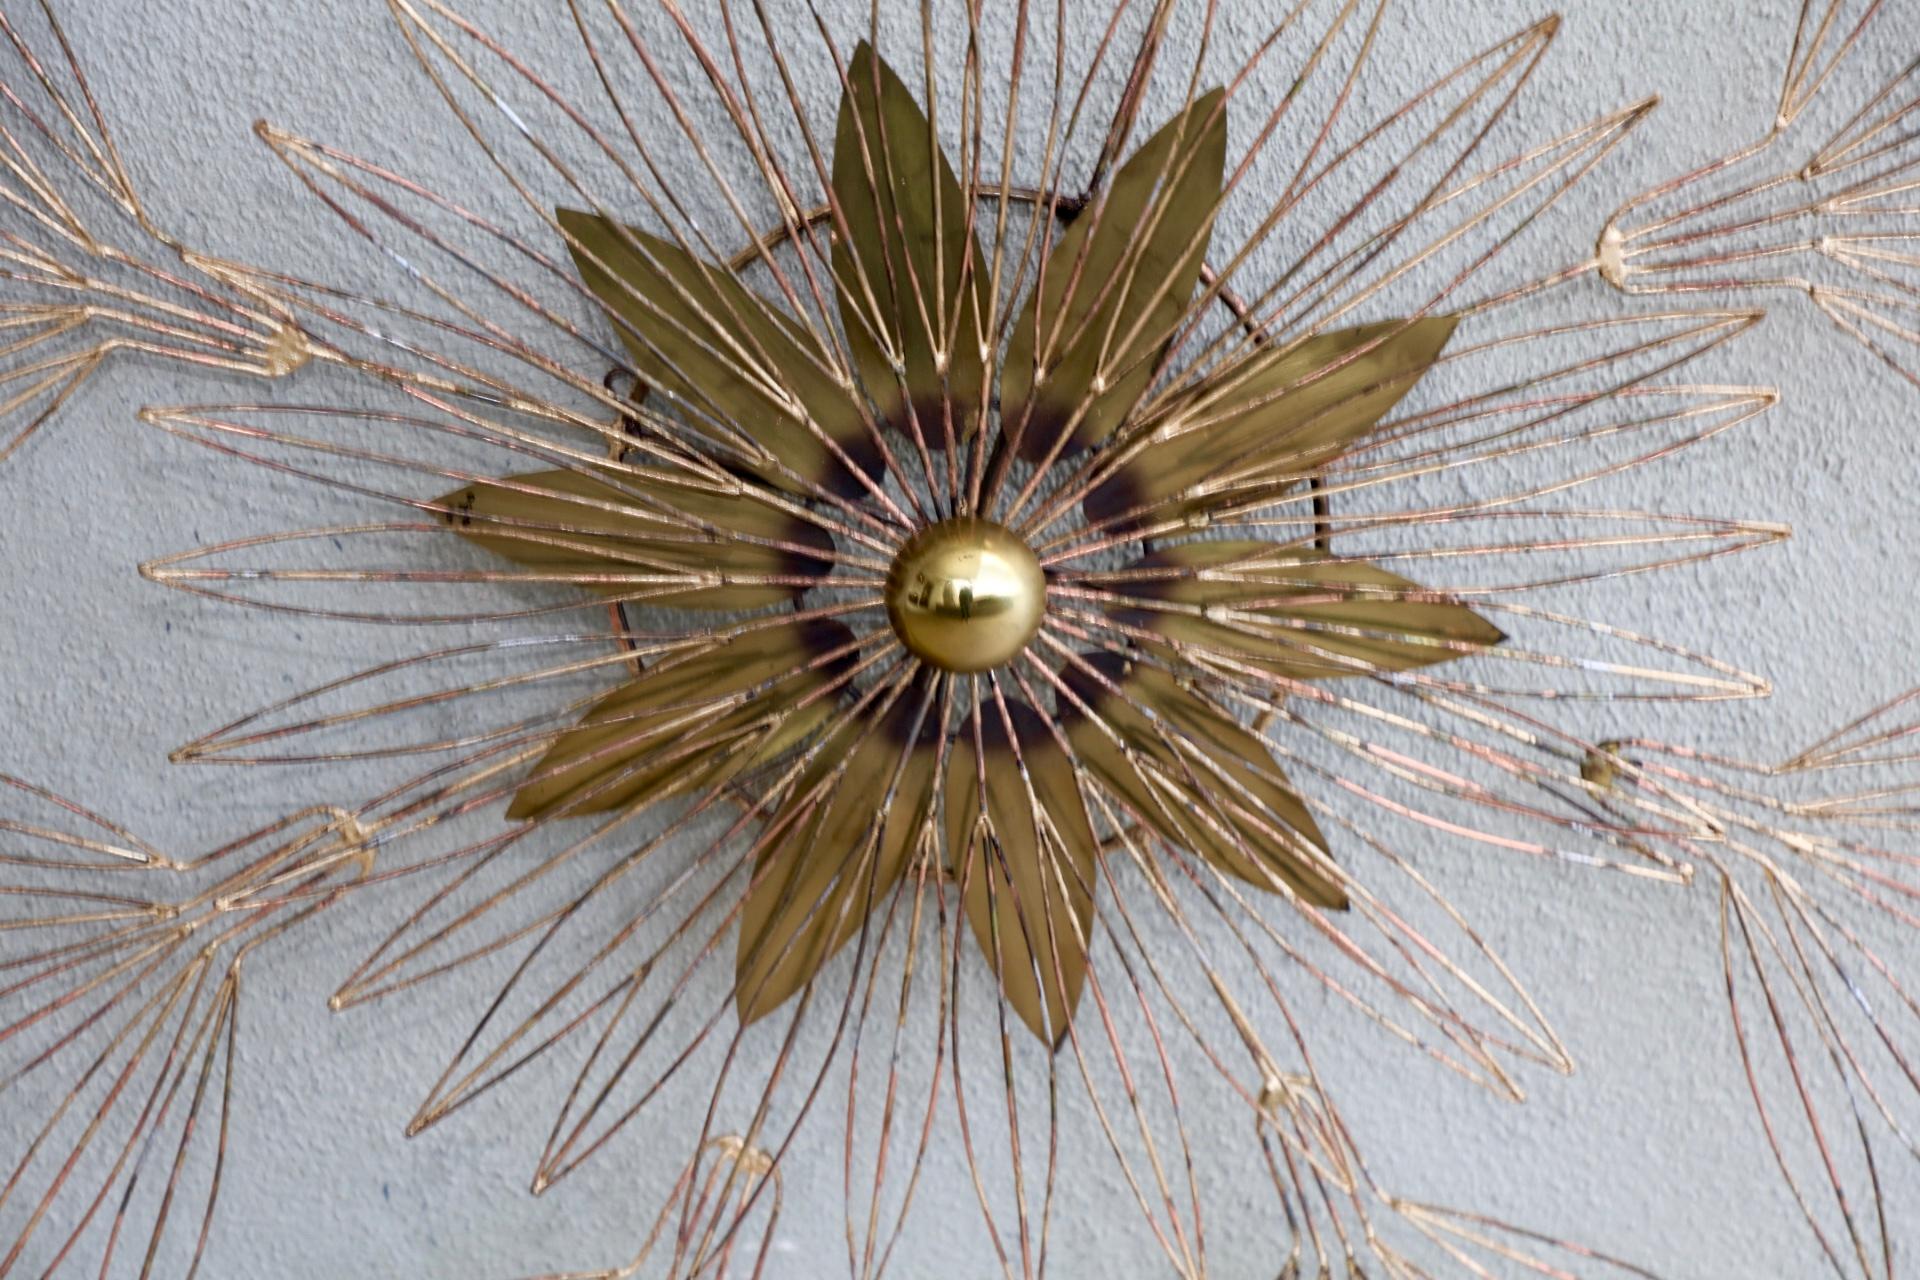 A nice signed Curtis Jere wire wall sculpture in the shape of a star blossom. it is signed and dated 1980. This piece appears to have clearly been touched up, but it is an unusual one and large at almost 4 feet in diameter.